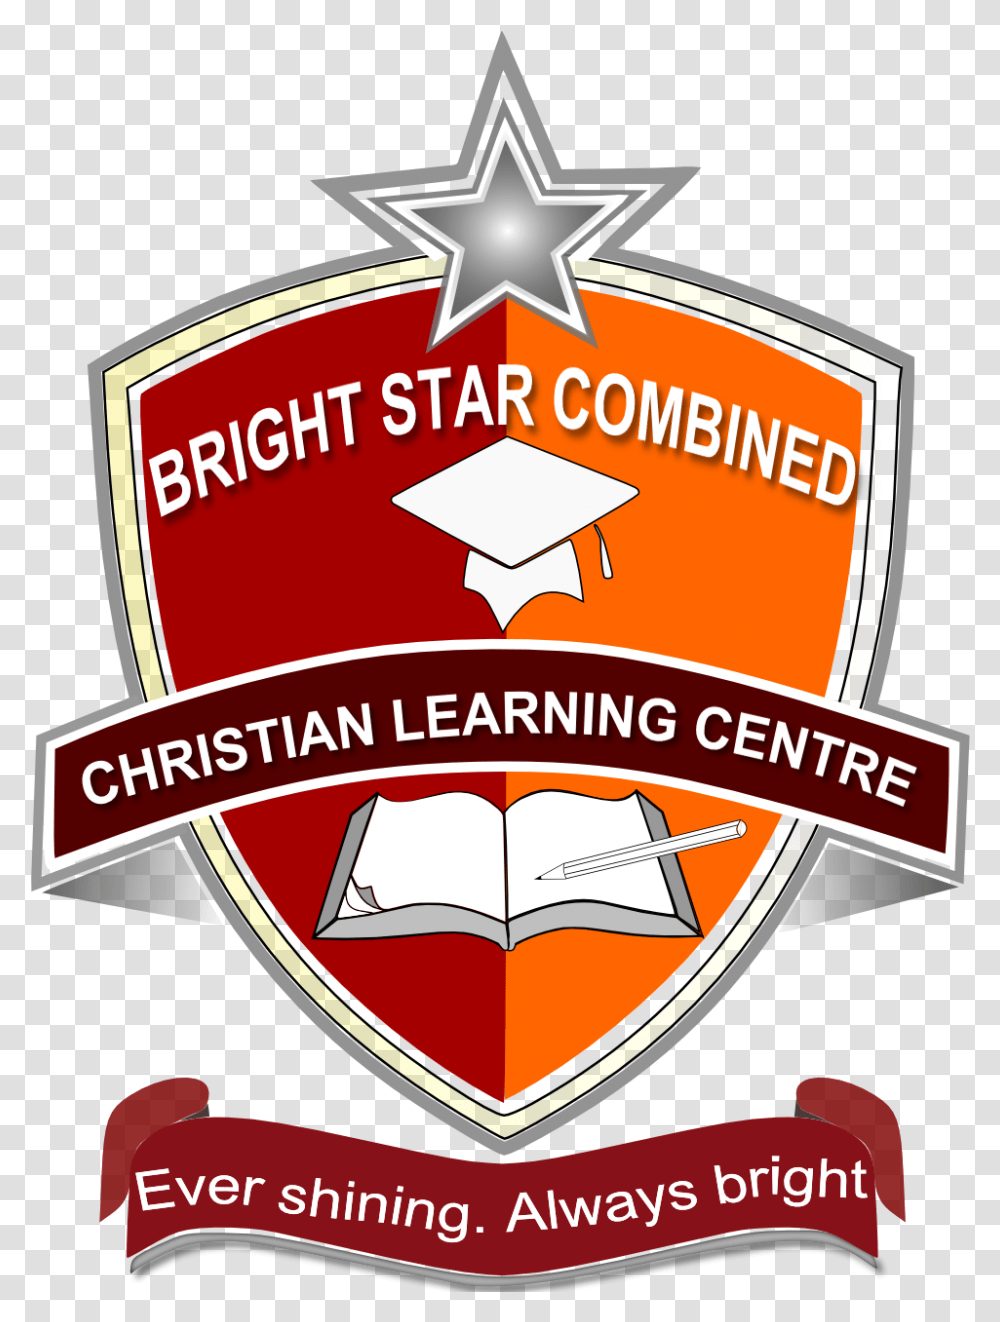 At Bright Star Christian Learning Centre We Believe Bright Bright Star Christian Learning Center, Logo, Symbol, Label, Text Transparent Png